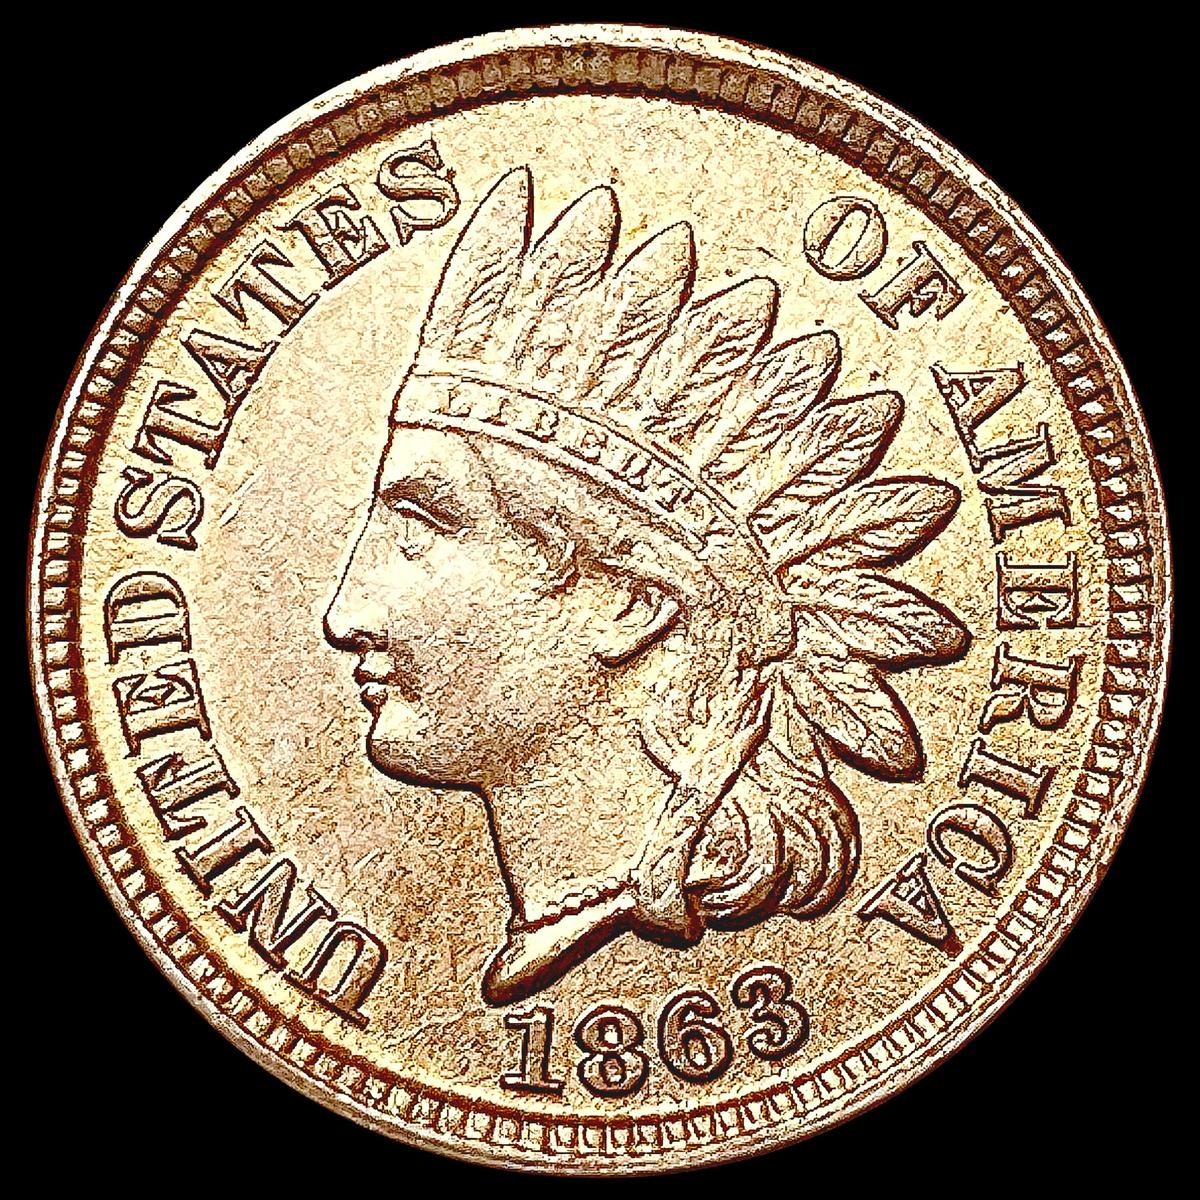 1863 Indian Head Cent UNCIRCULATED